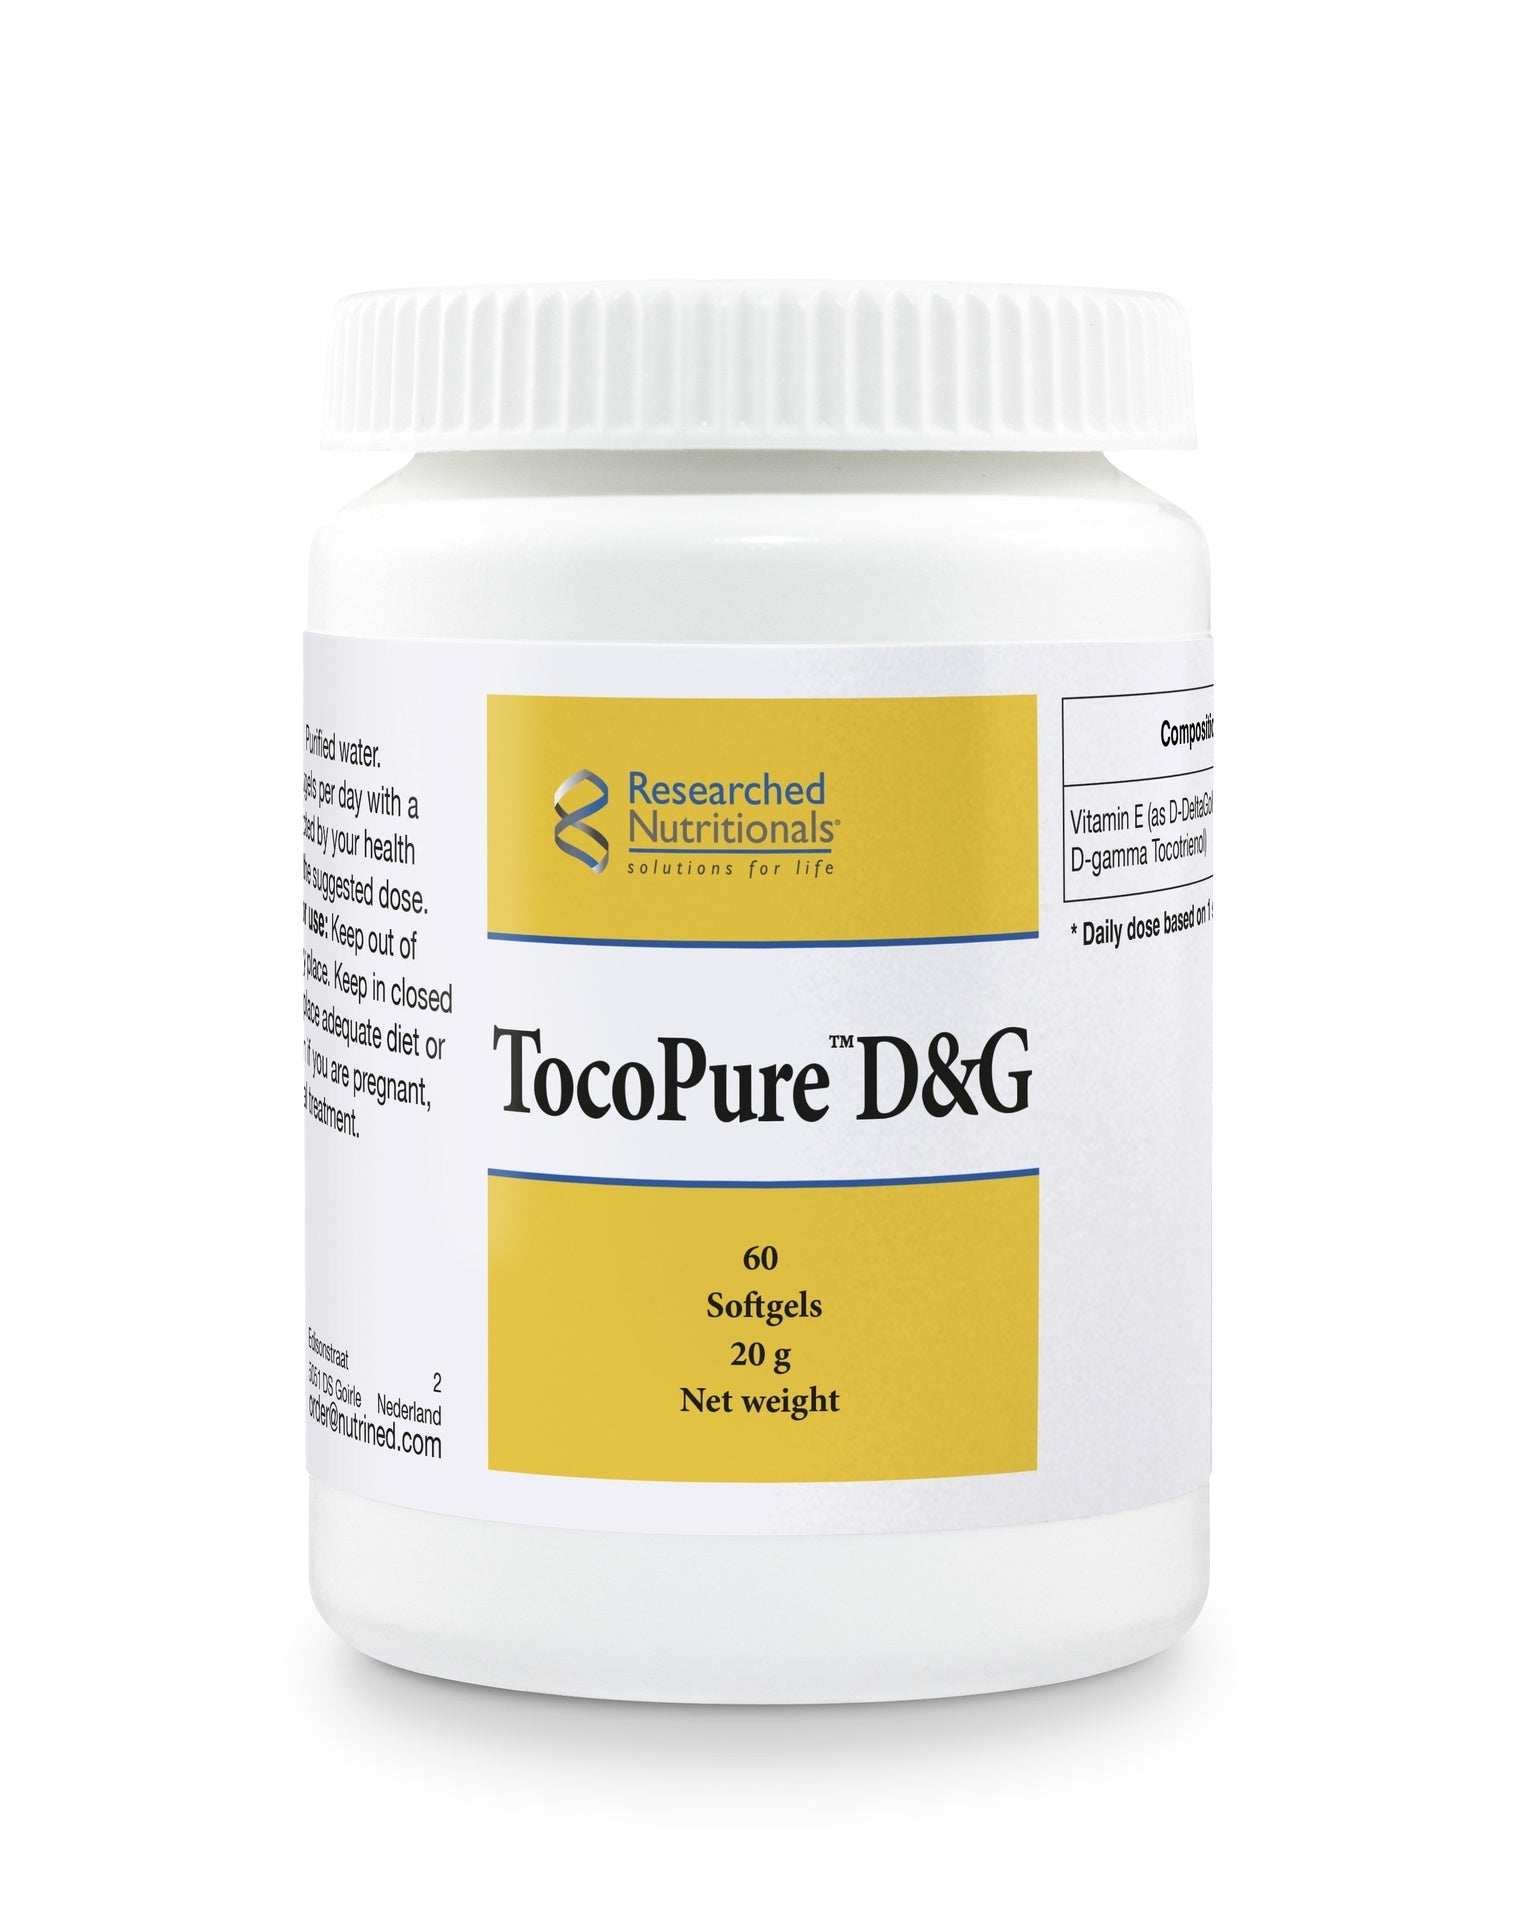 TocoPure D&G (High Potency Tocotrienols) - 60 Softgels | Researched Nutritionals